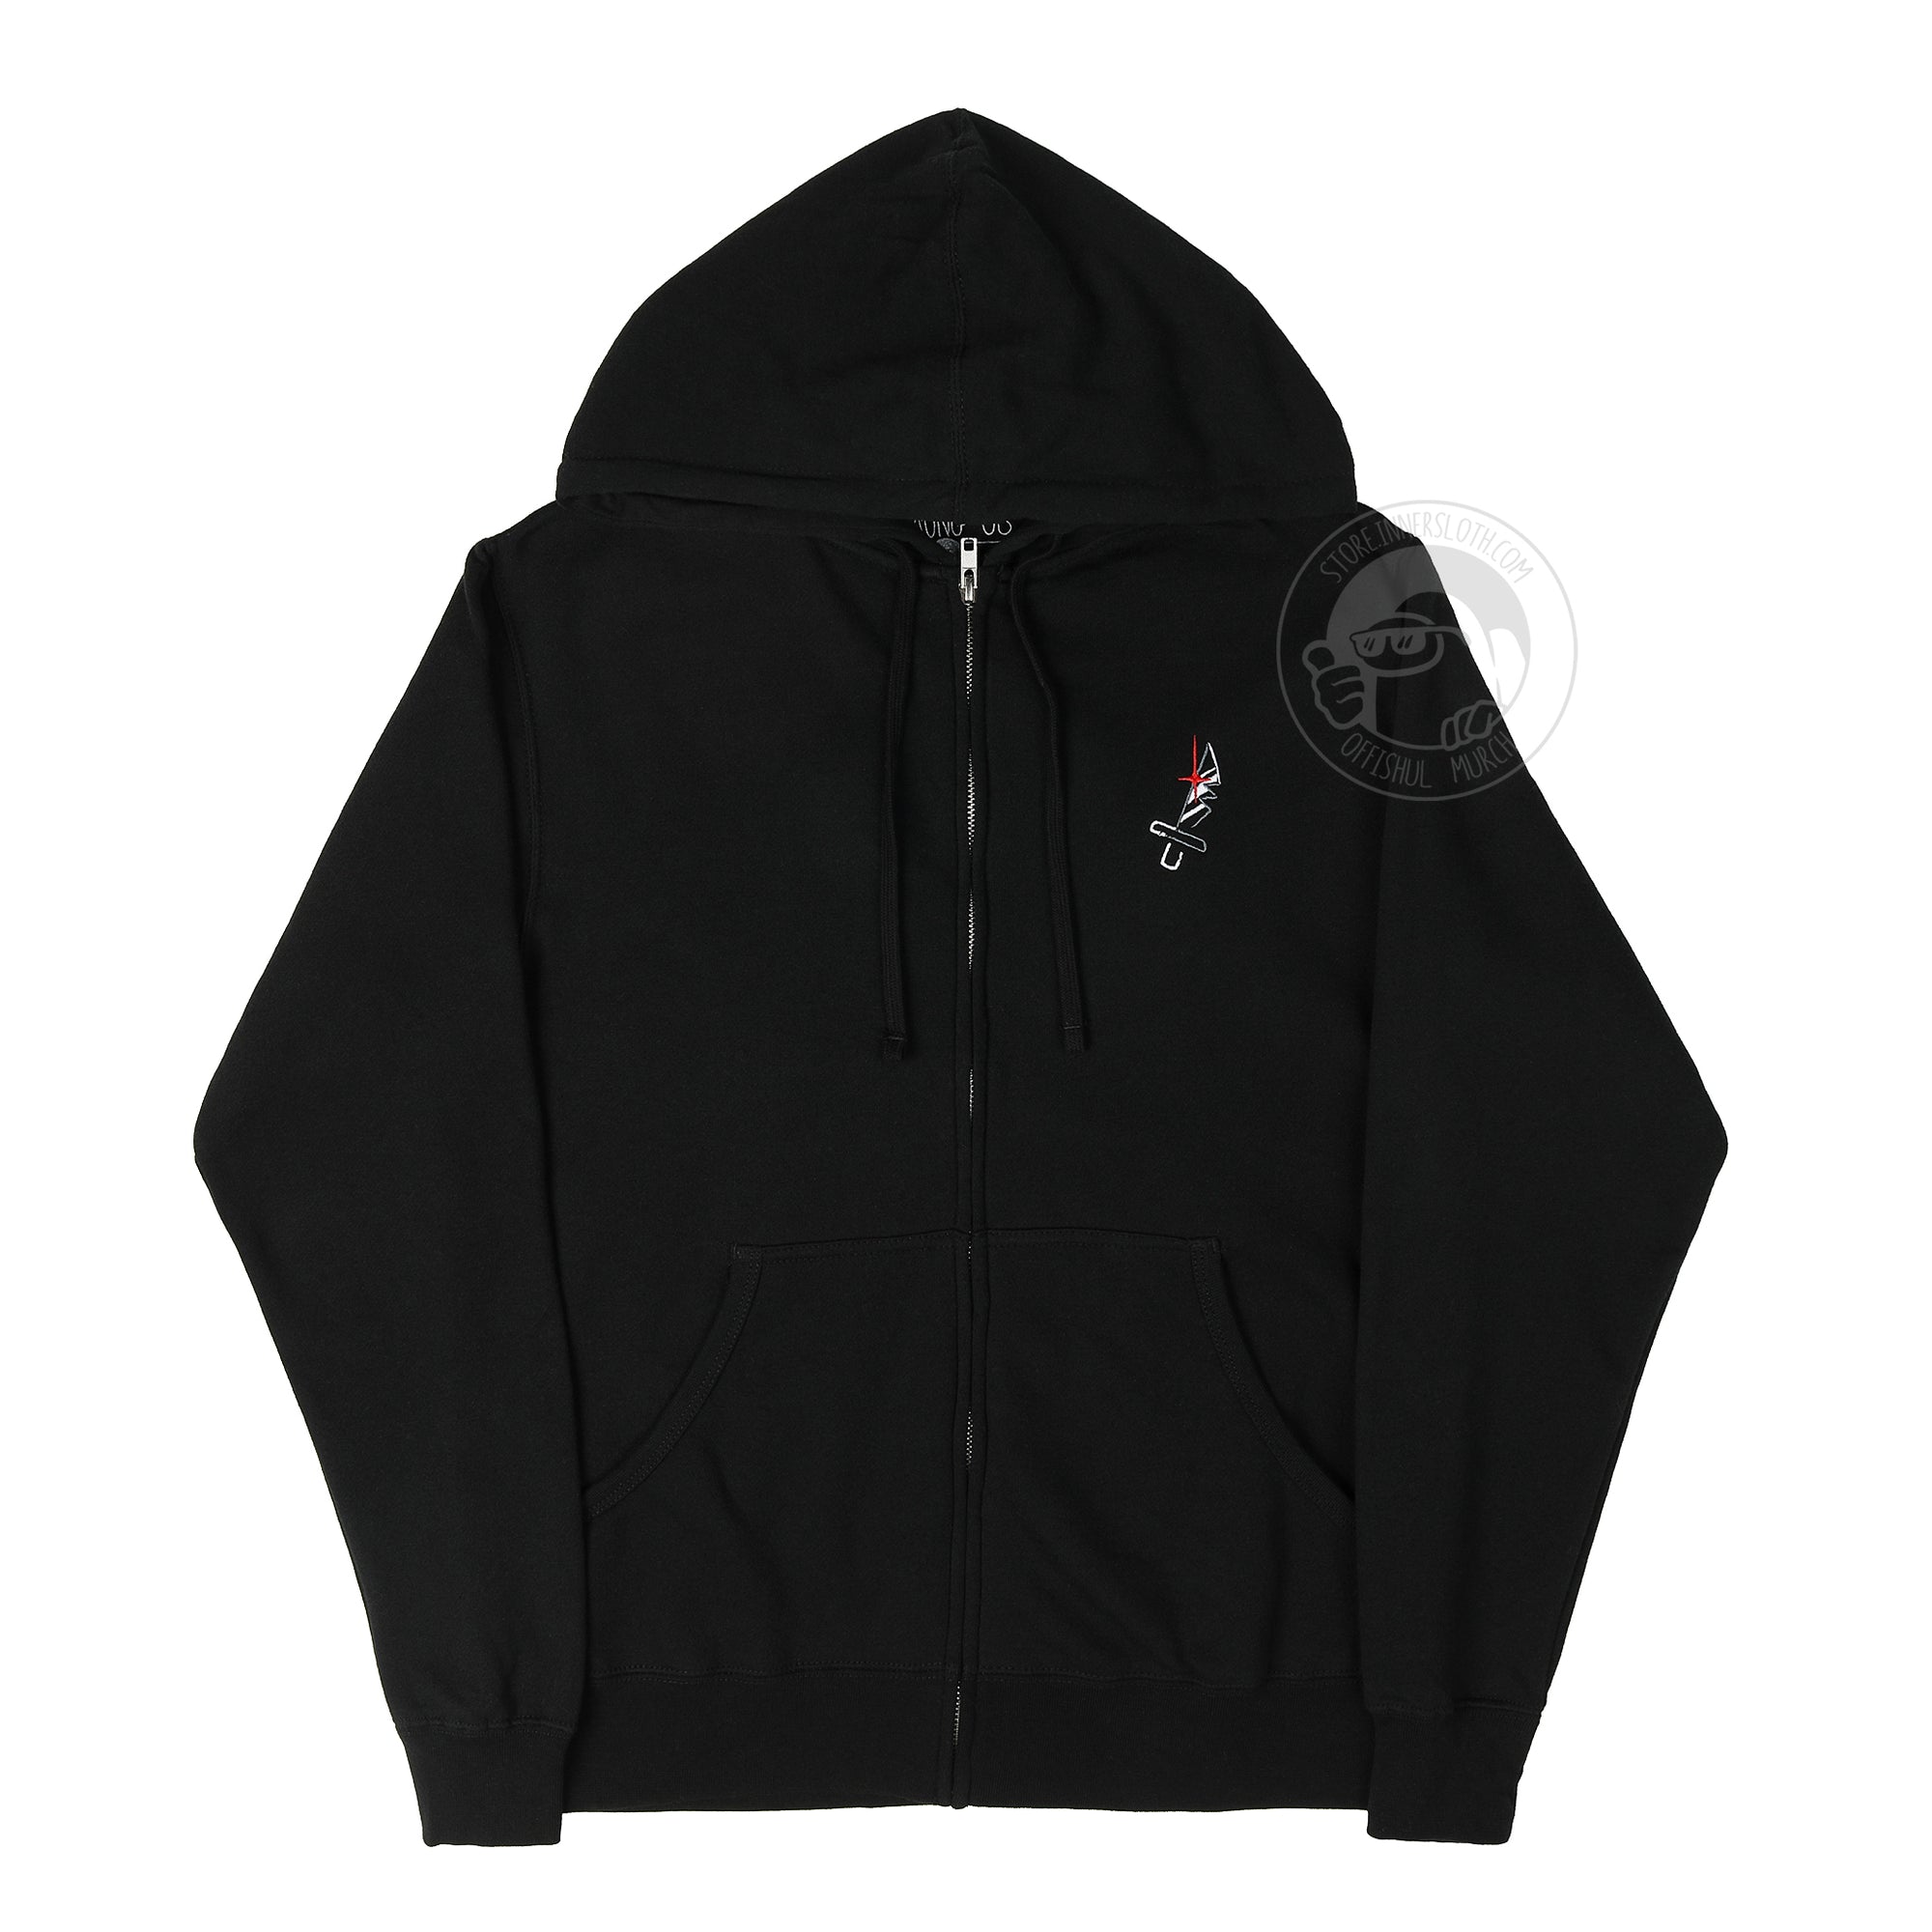 A flat lay photograph of a black zip-up hoodie. Embroidered art on the left breast shows a small white knife with a red impostor shine.